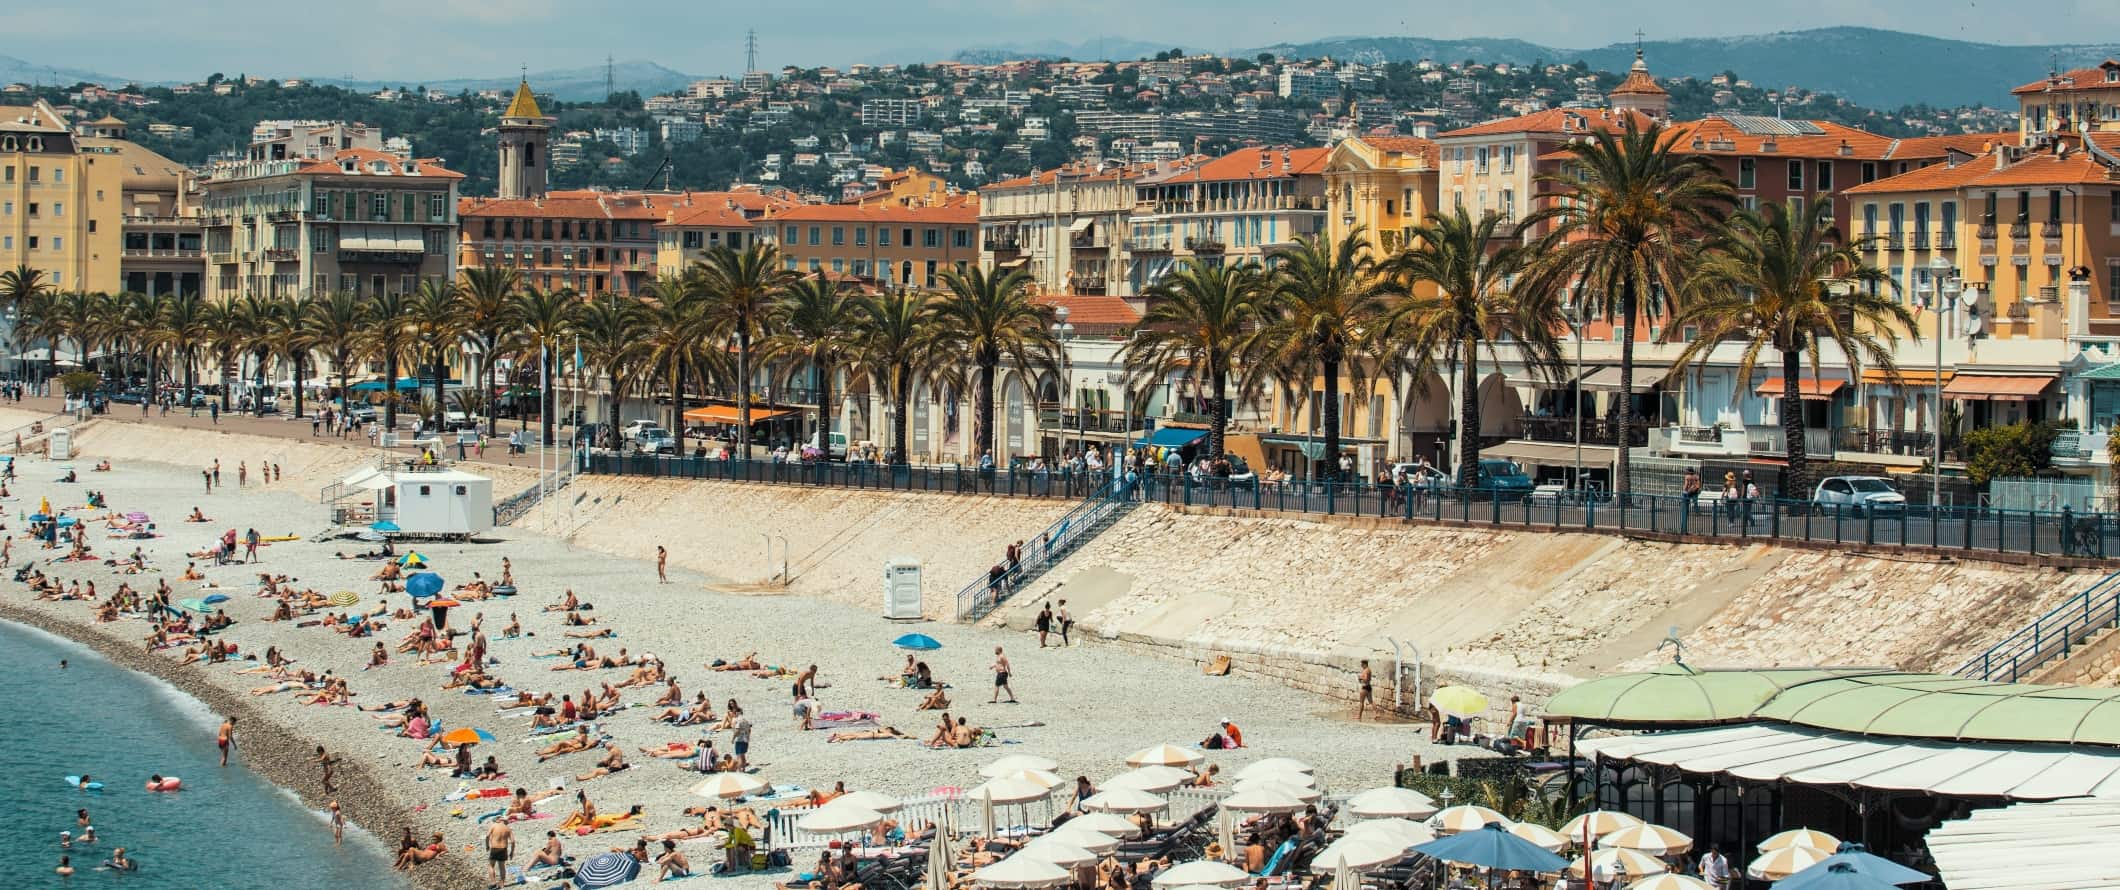 People lying on the beach in front of a palm-tree-lined promenade with the city of Nice, France rising in the background